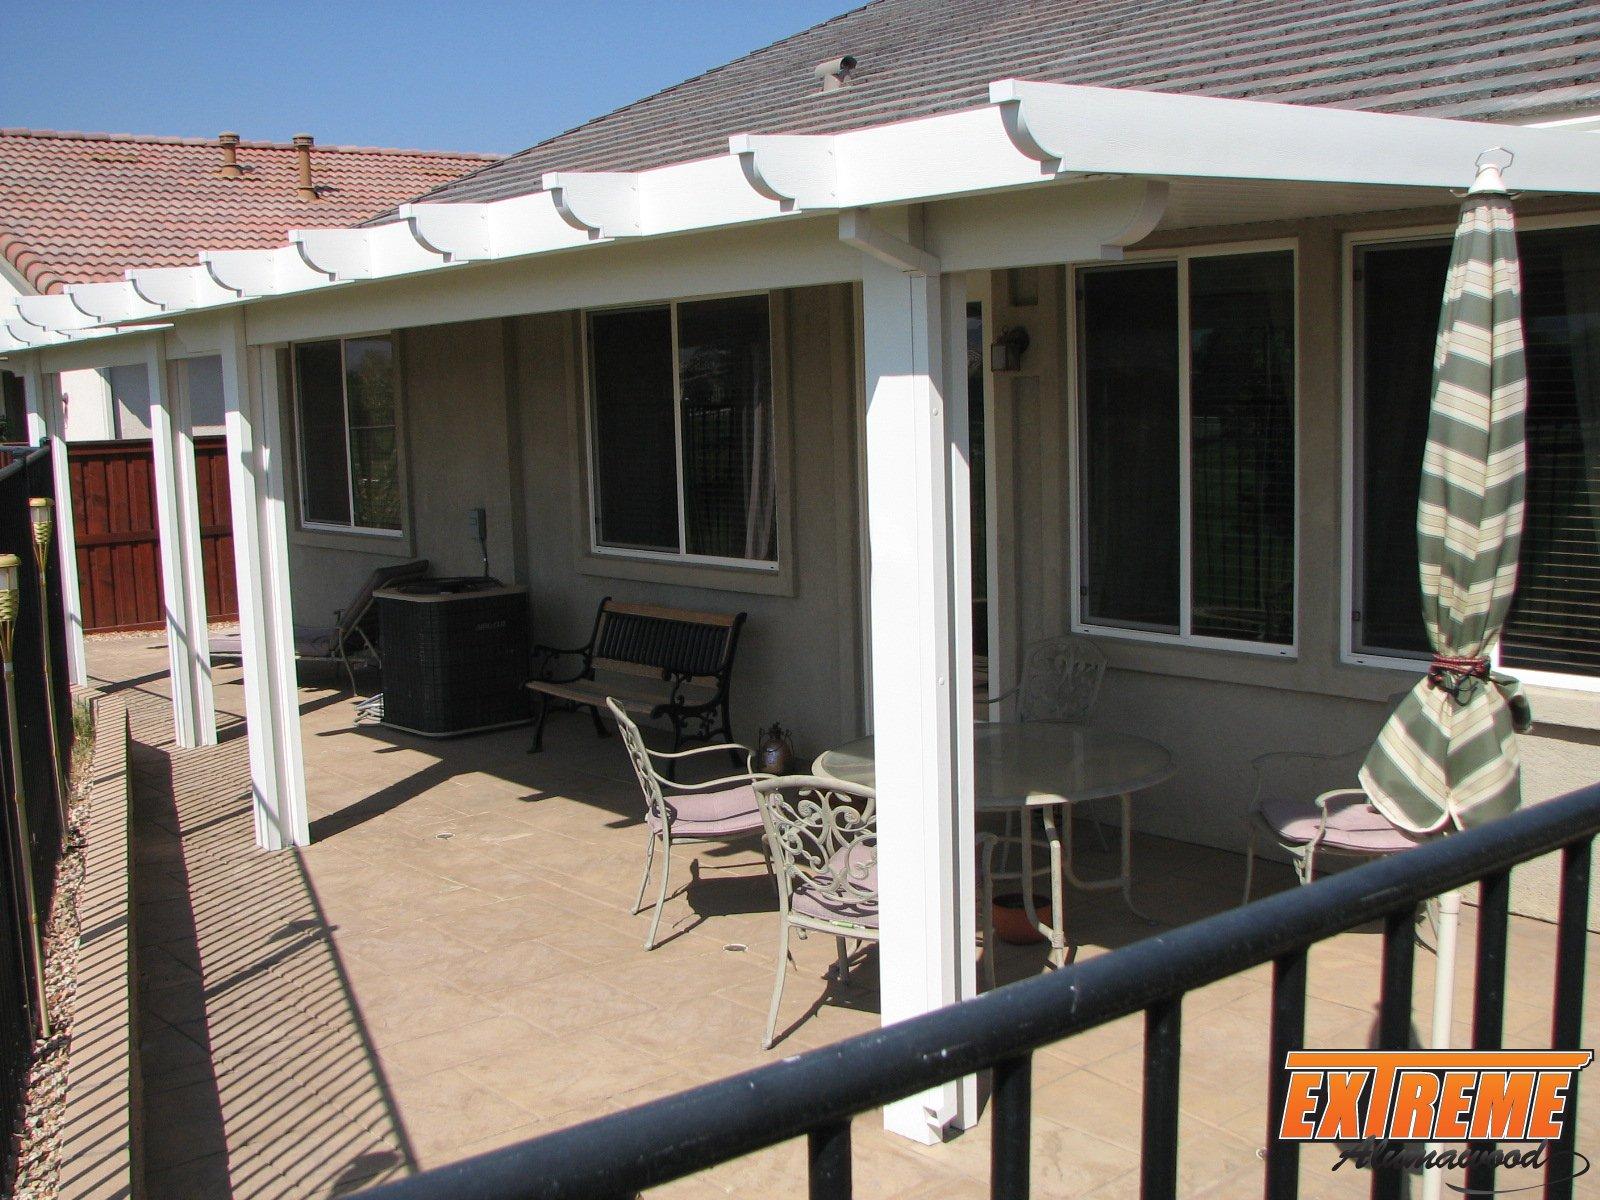 Alumatech Patio Covers Beaumont Ca Installation Available intended for size 1600 X 1200